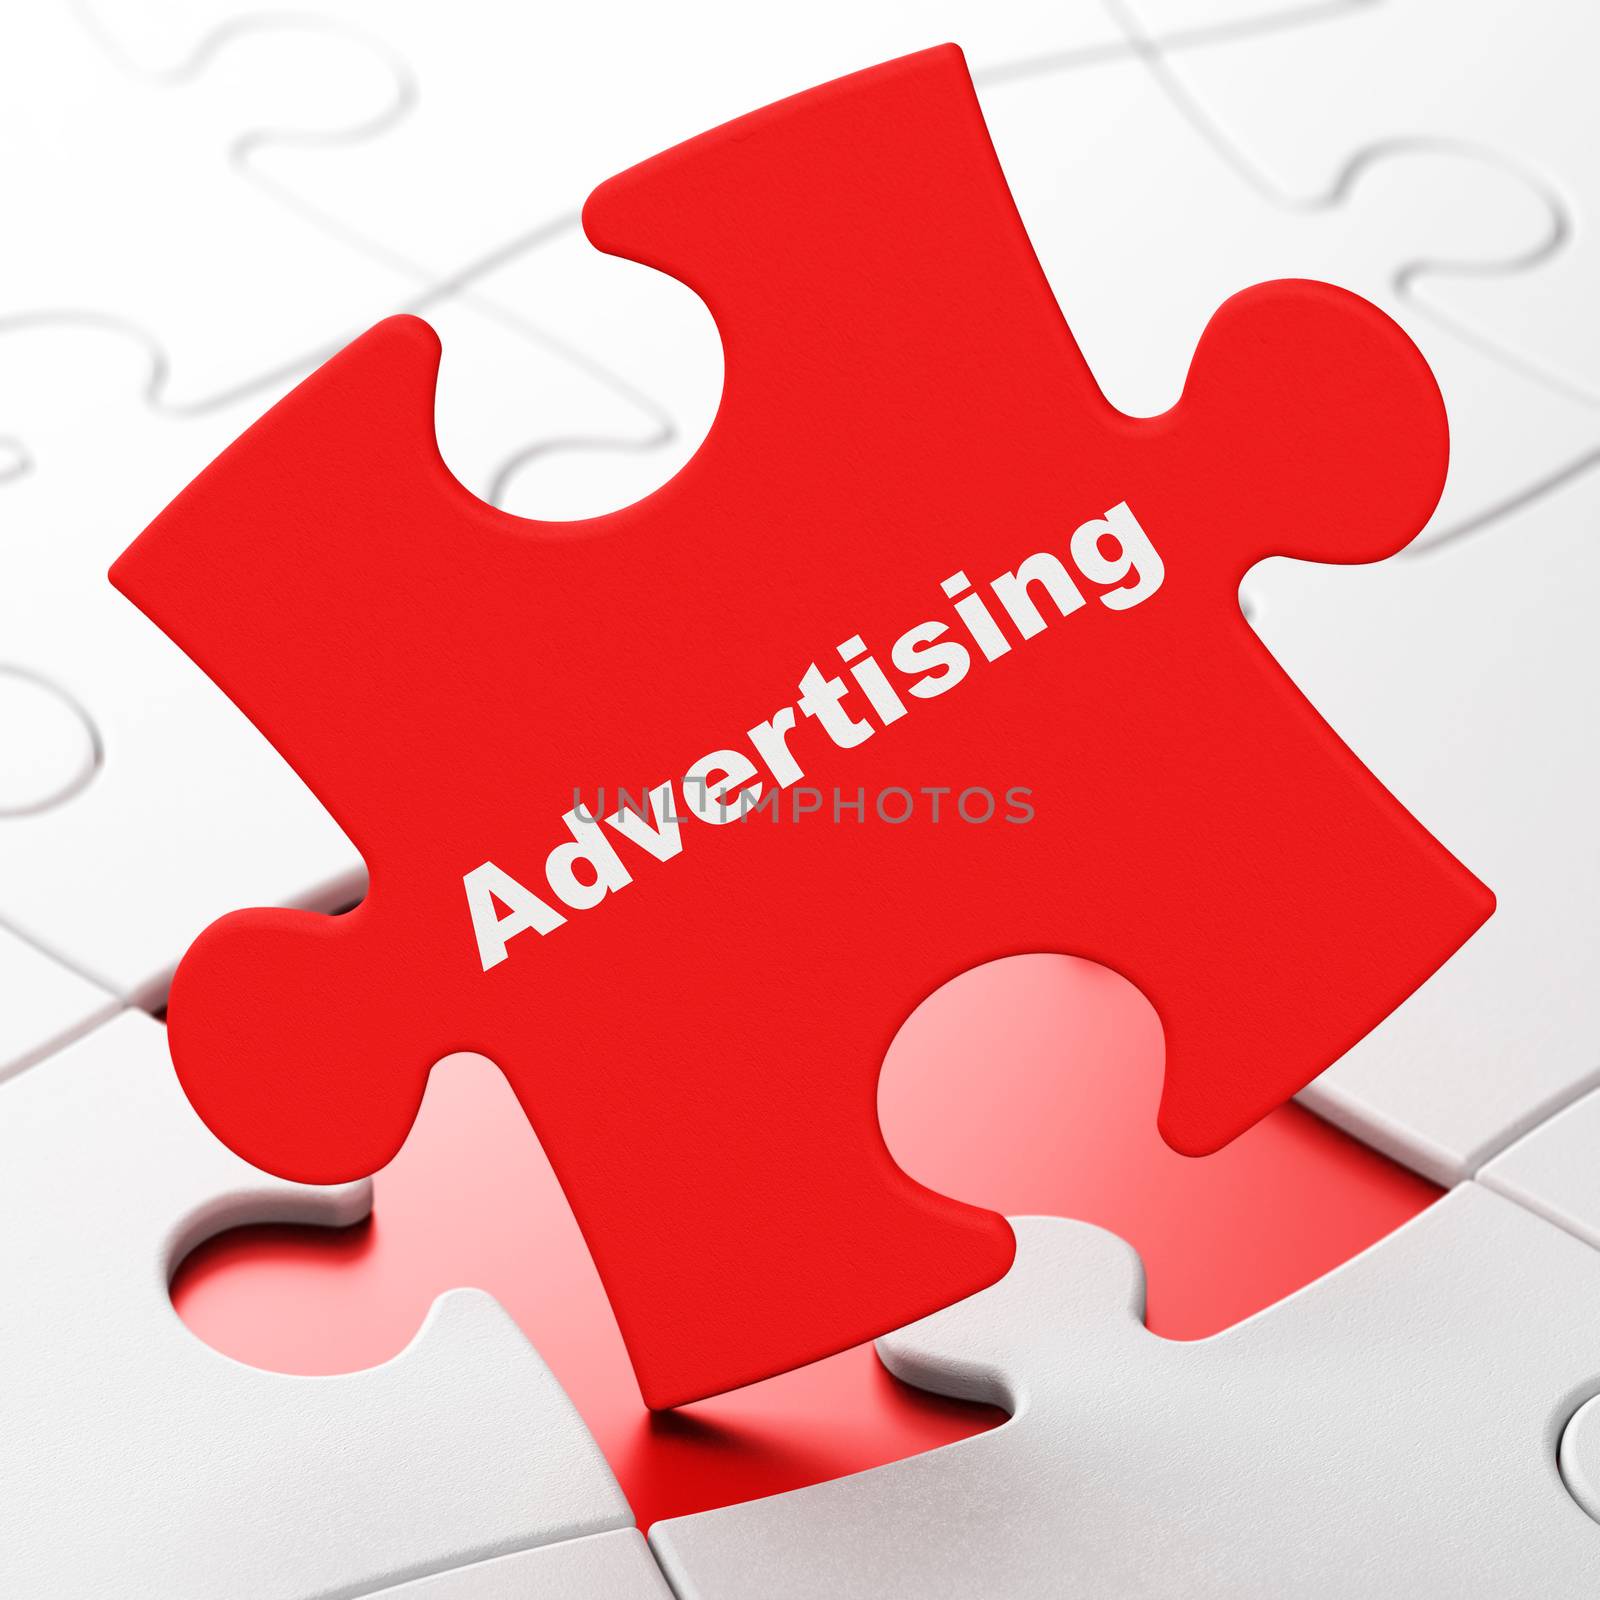 Marketing concept: Advertising on Red puzzle pieces background, 3d render